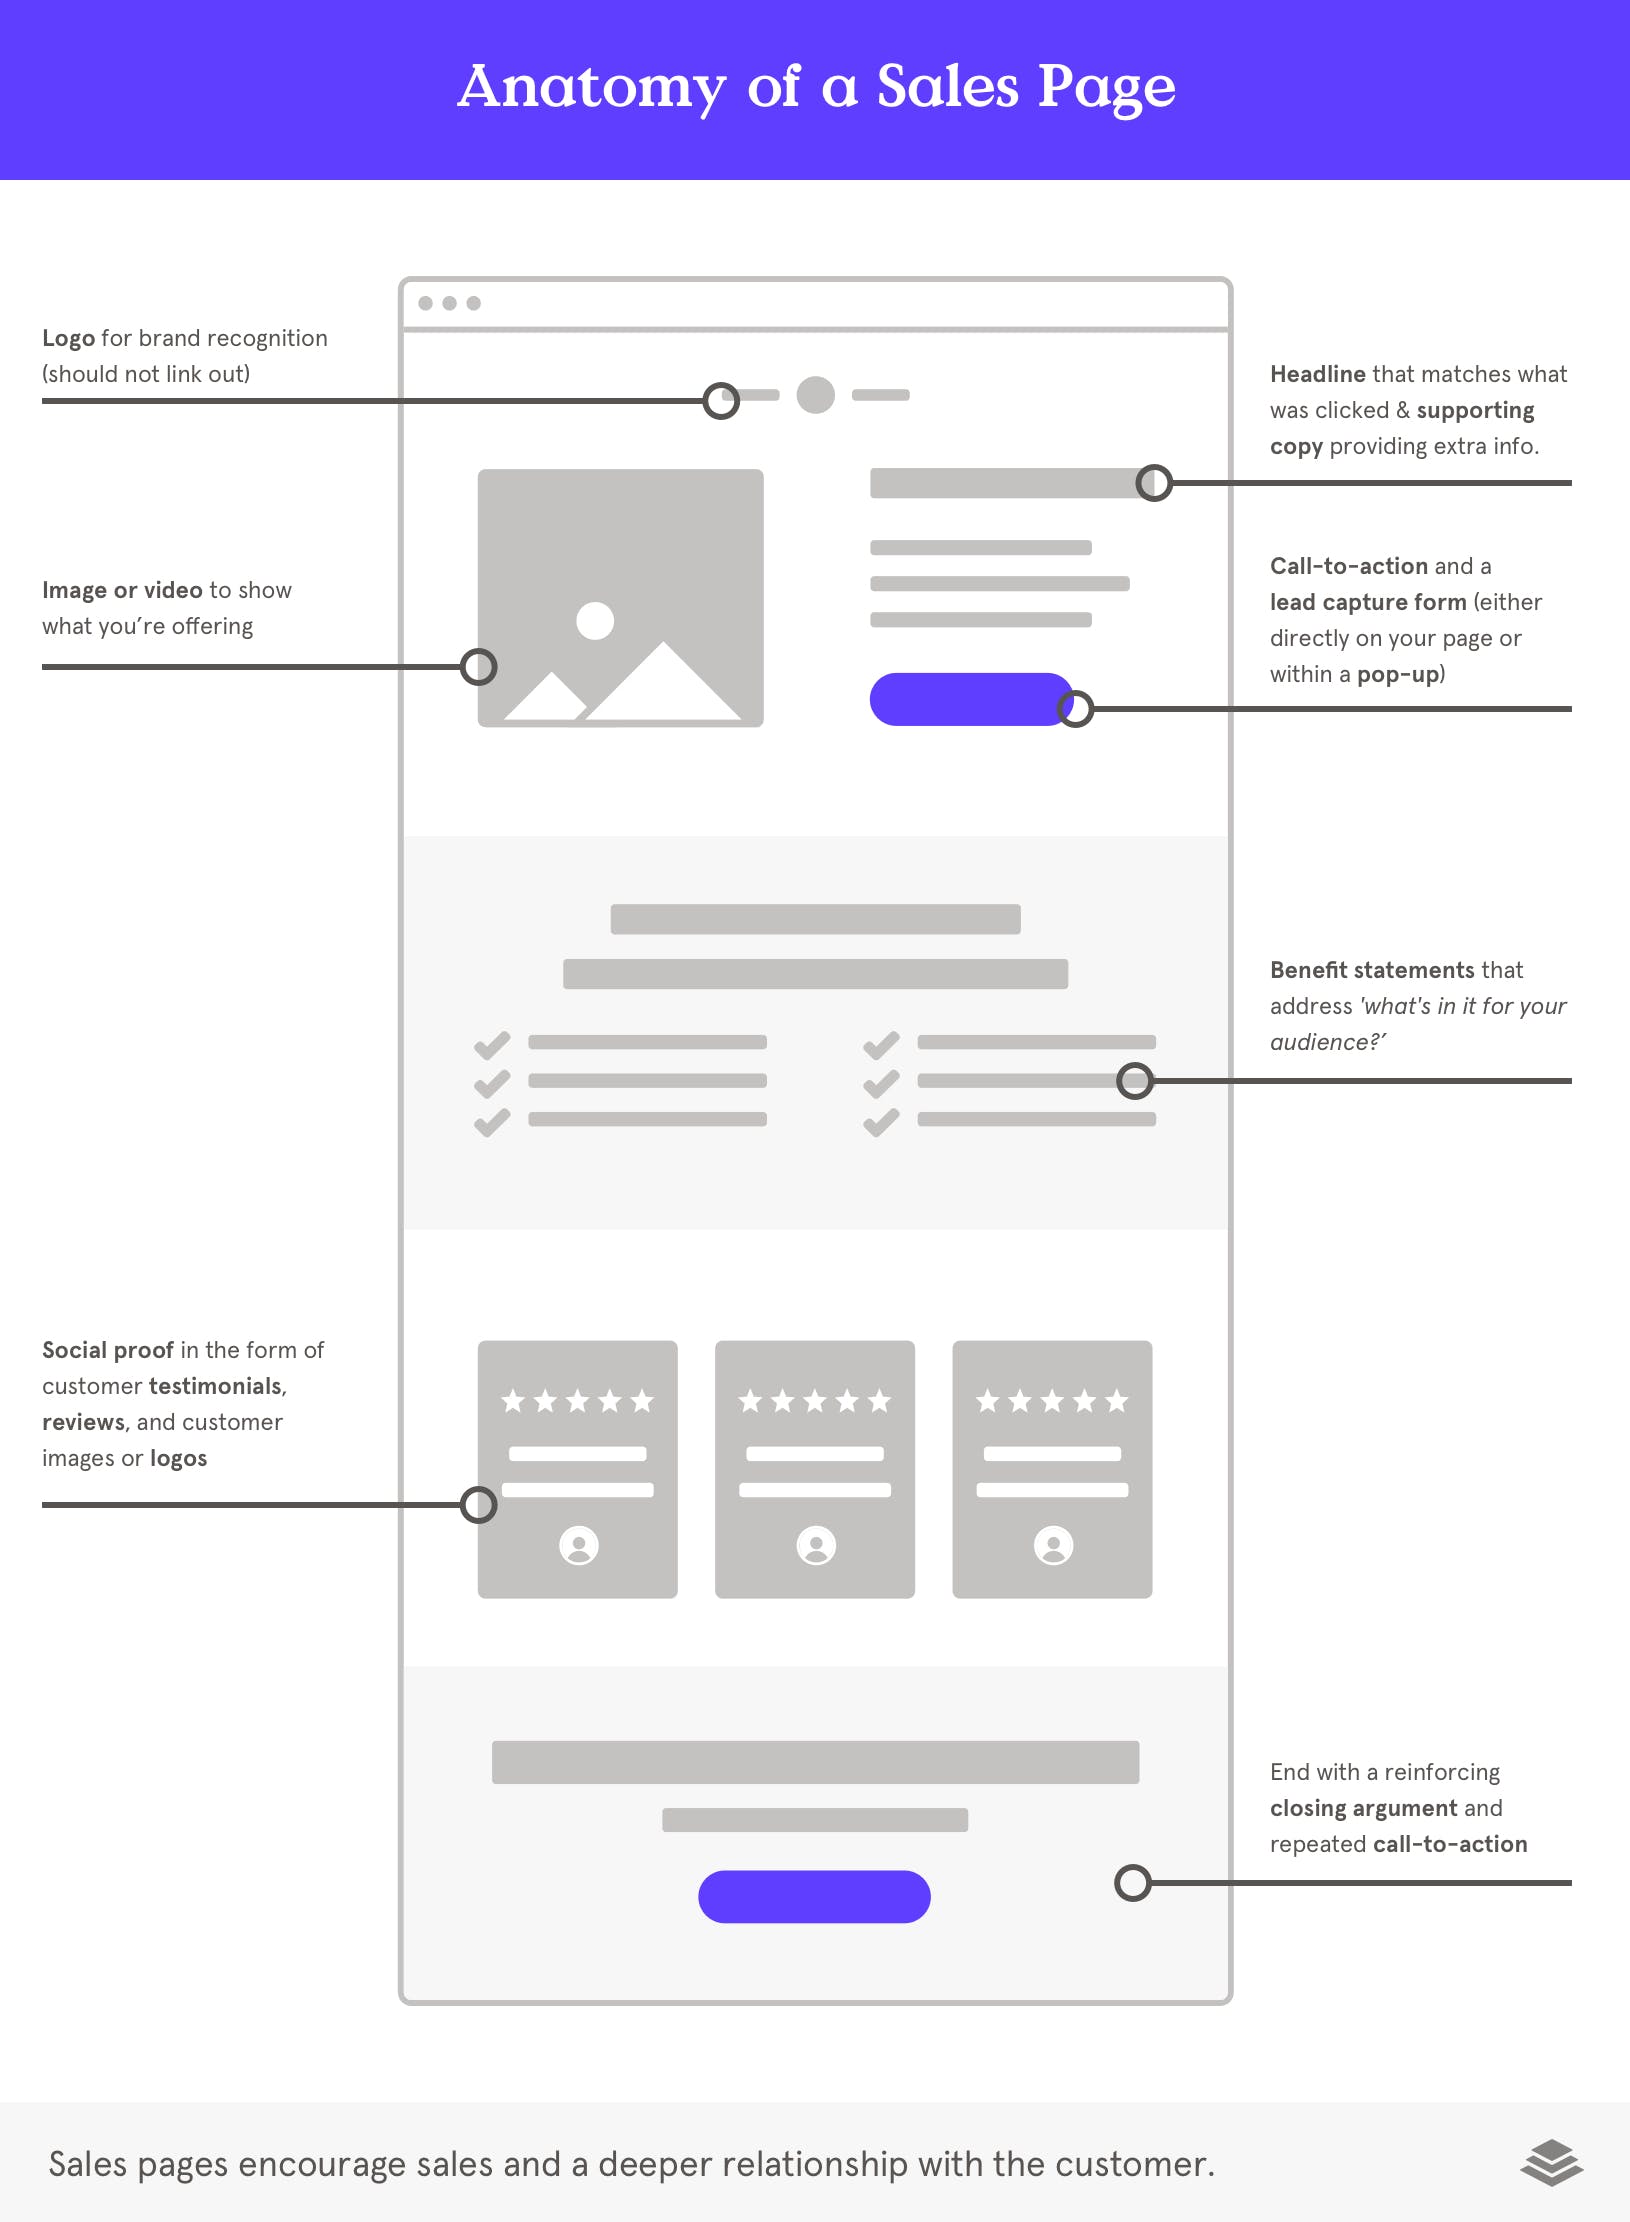 anatomy of a sales page landing page example